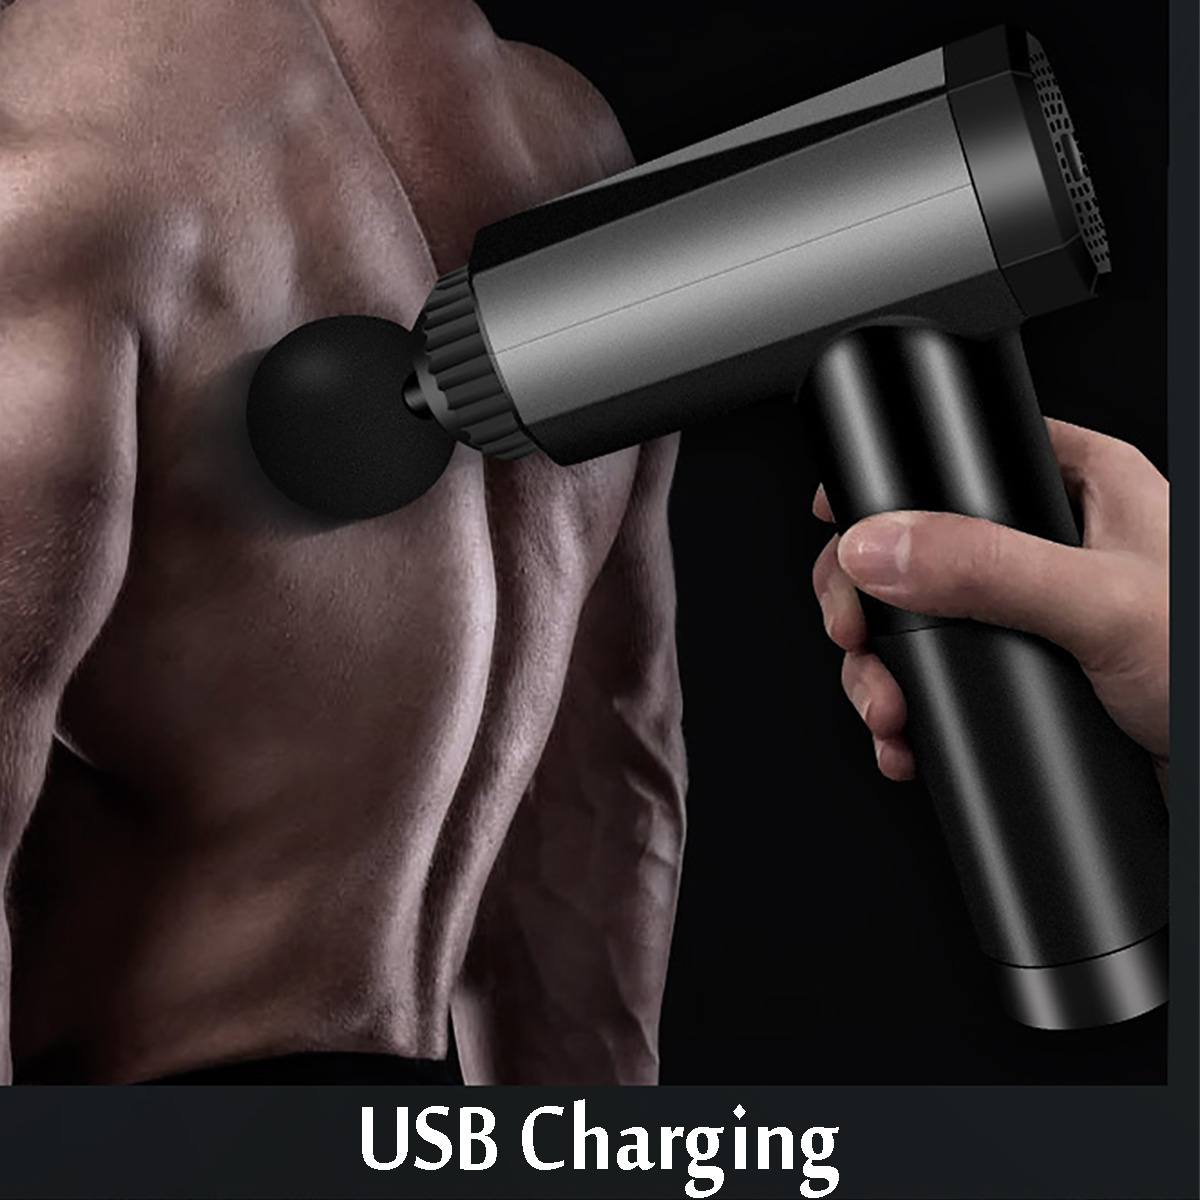 6-Gear-Electric-Percussion-Massager-USB-Muscle-Tissue-Pain-Relax-Therapy-Massager--4-Heads-1693008-5